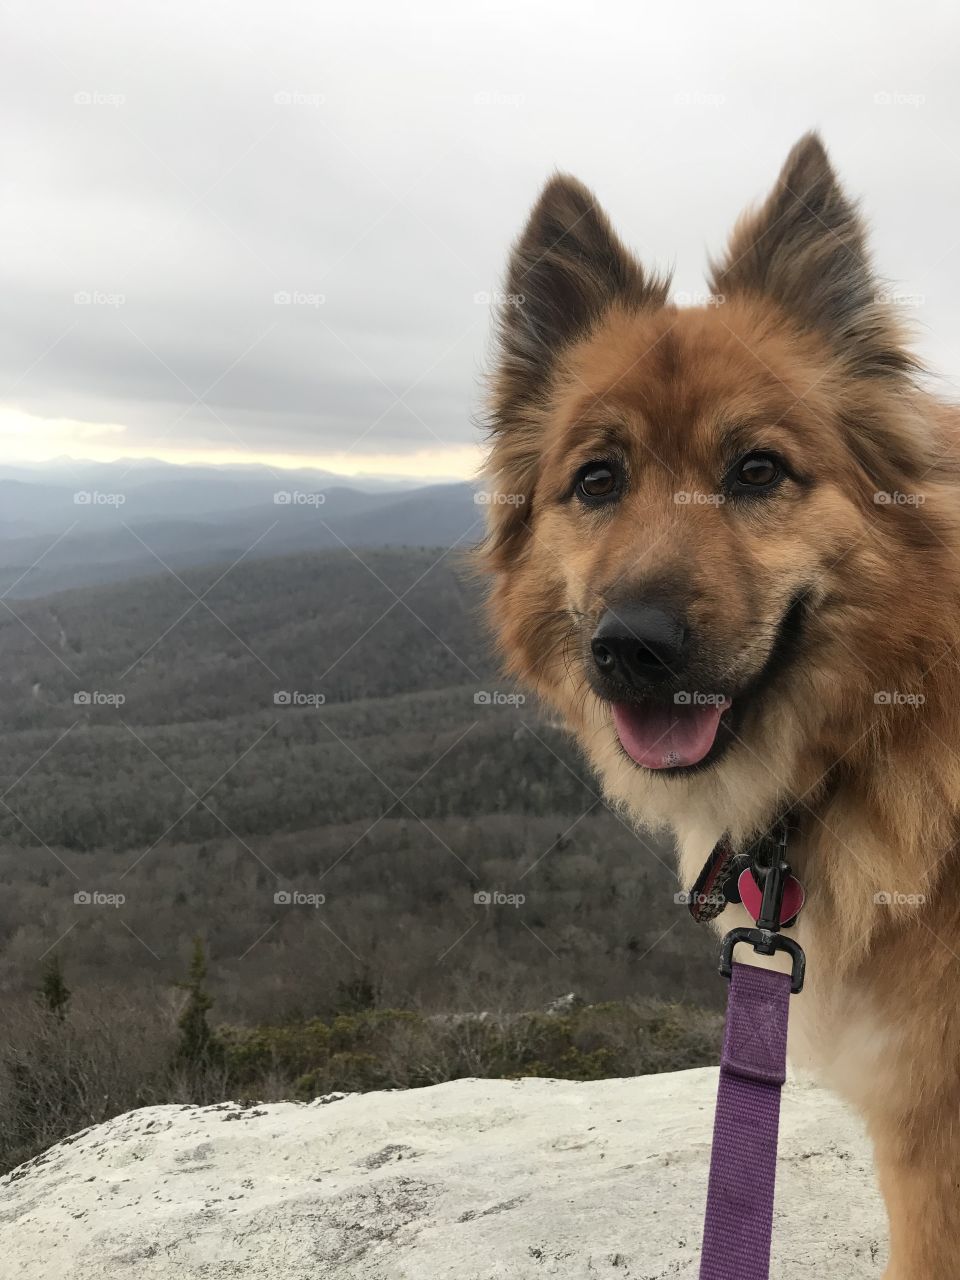 Hiking along the Blue Ridge Parkway with the puppy